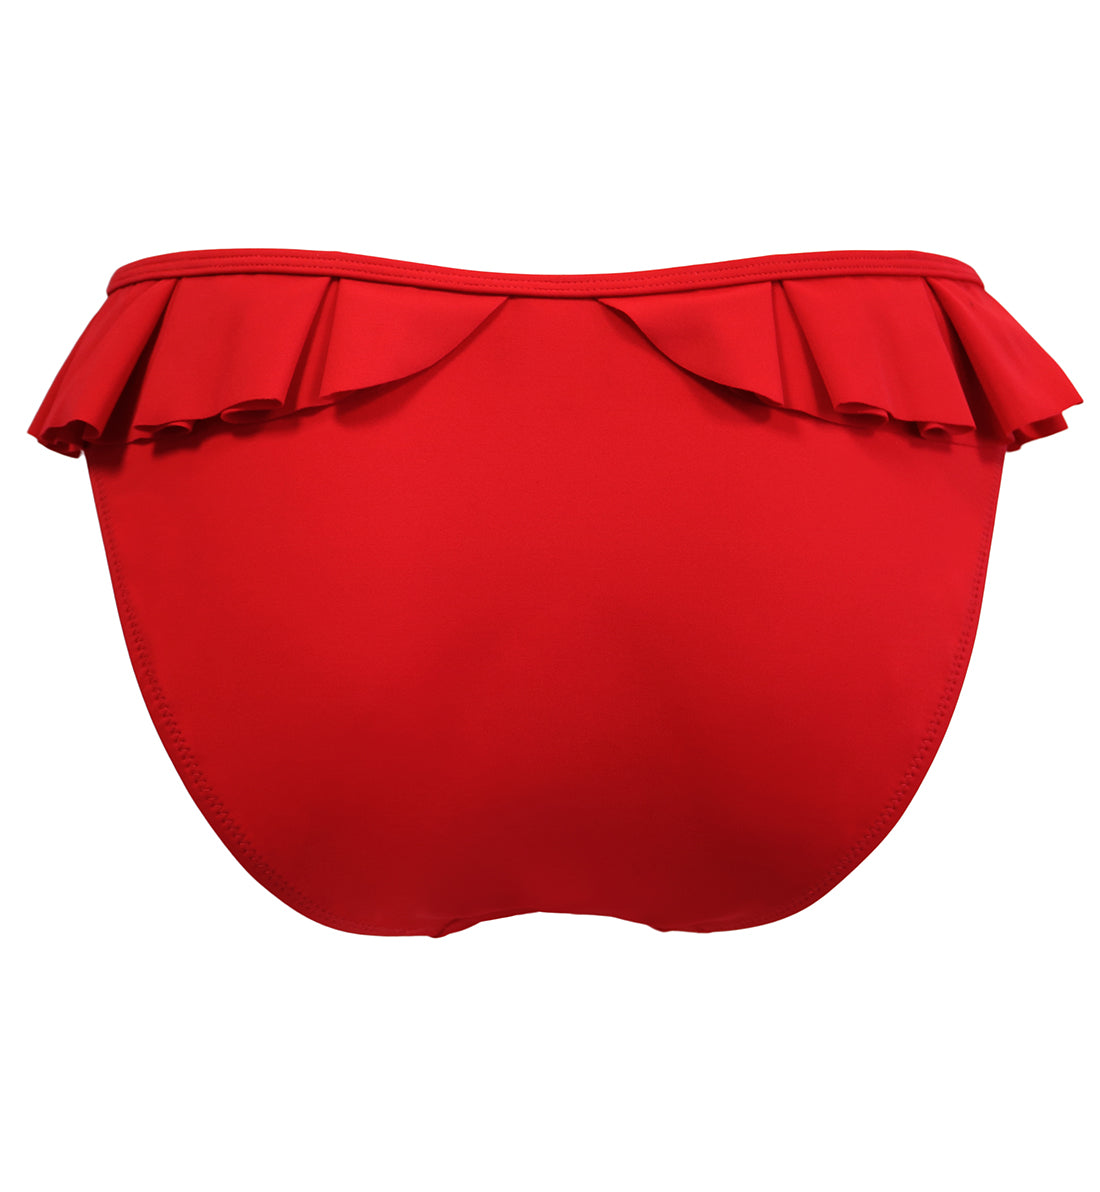 Pour Moi Space Frill Swim Brief (36048),XS,Red - Red,XS